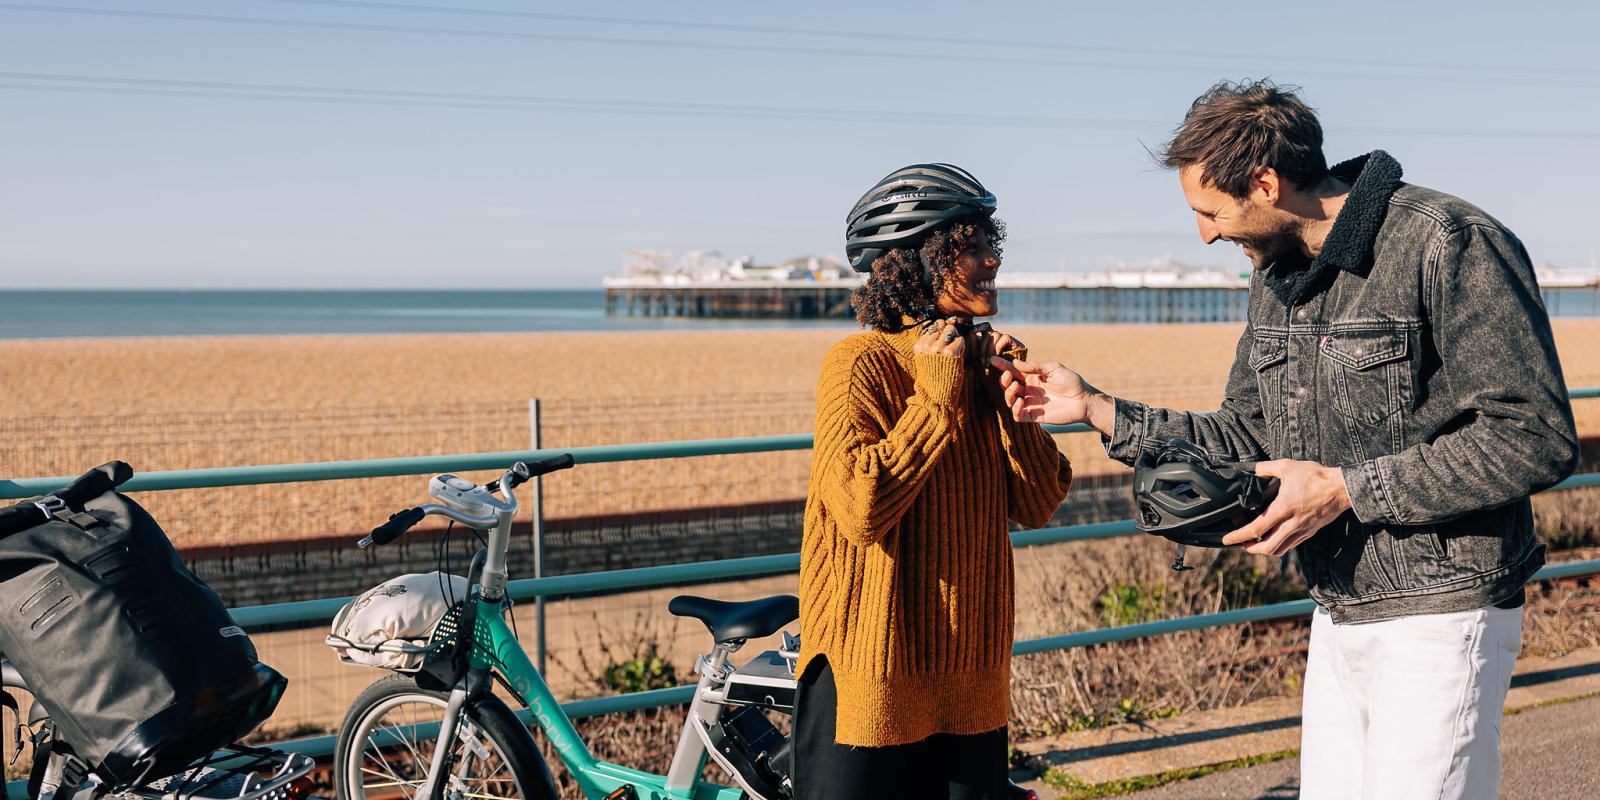 A man is helping a woman to adjust her bike helmet, they are standing in front of a beach with a pier